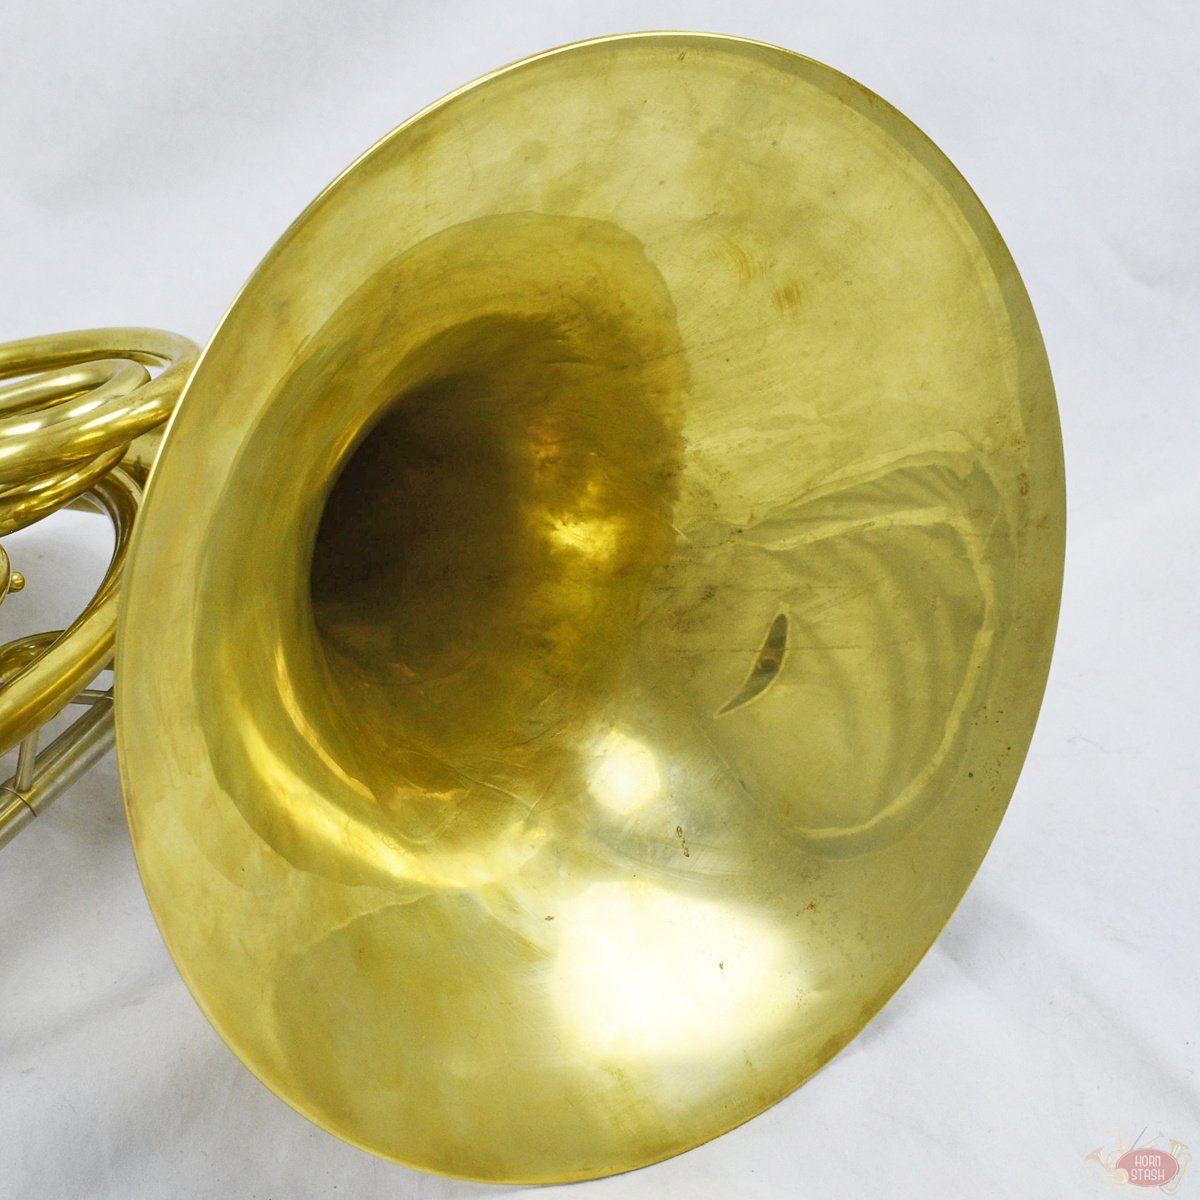 Holton Used Holton 77 Double French Horn  - 3518XX